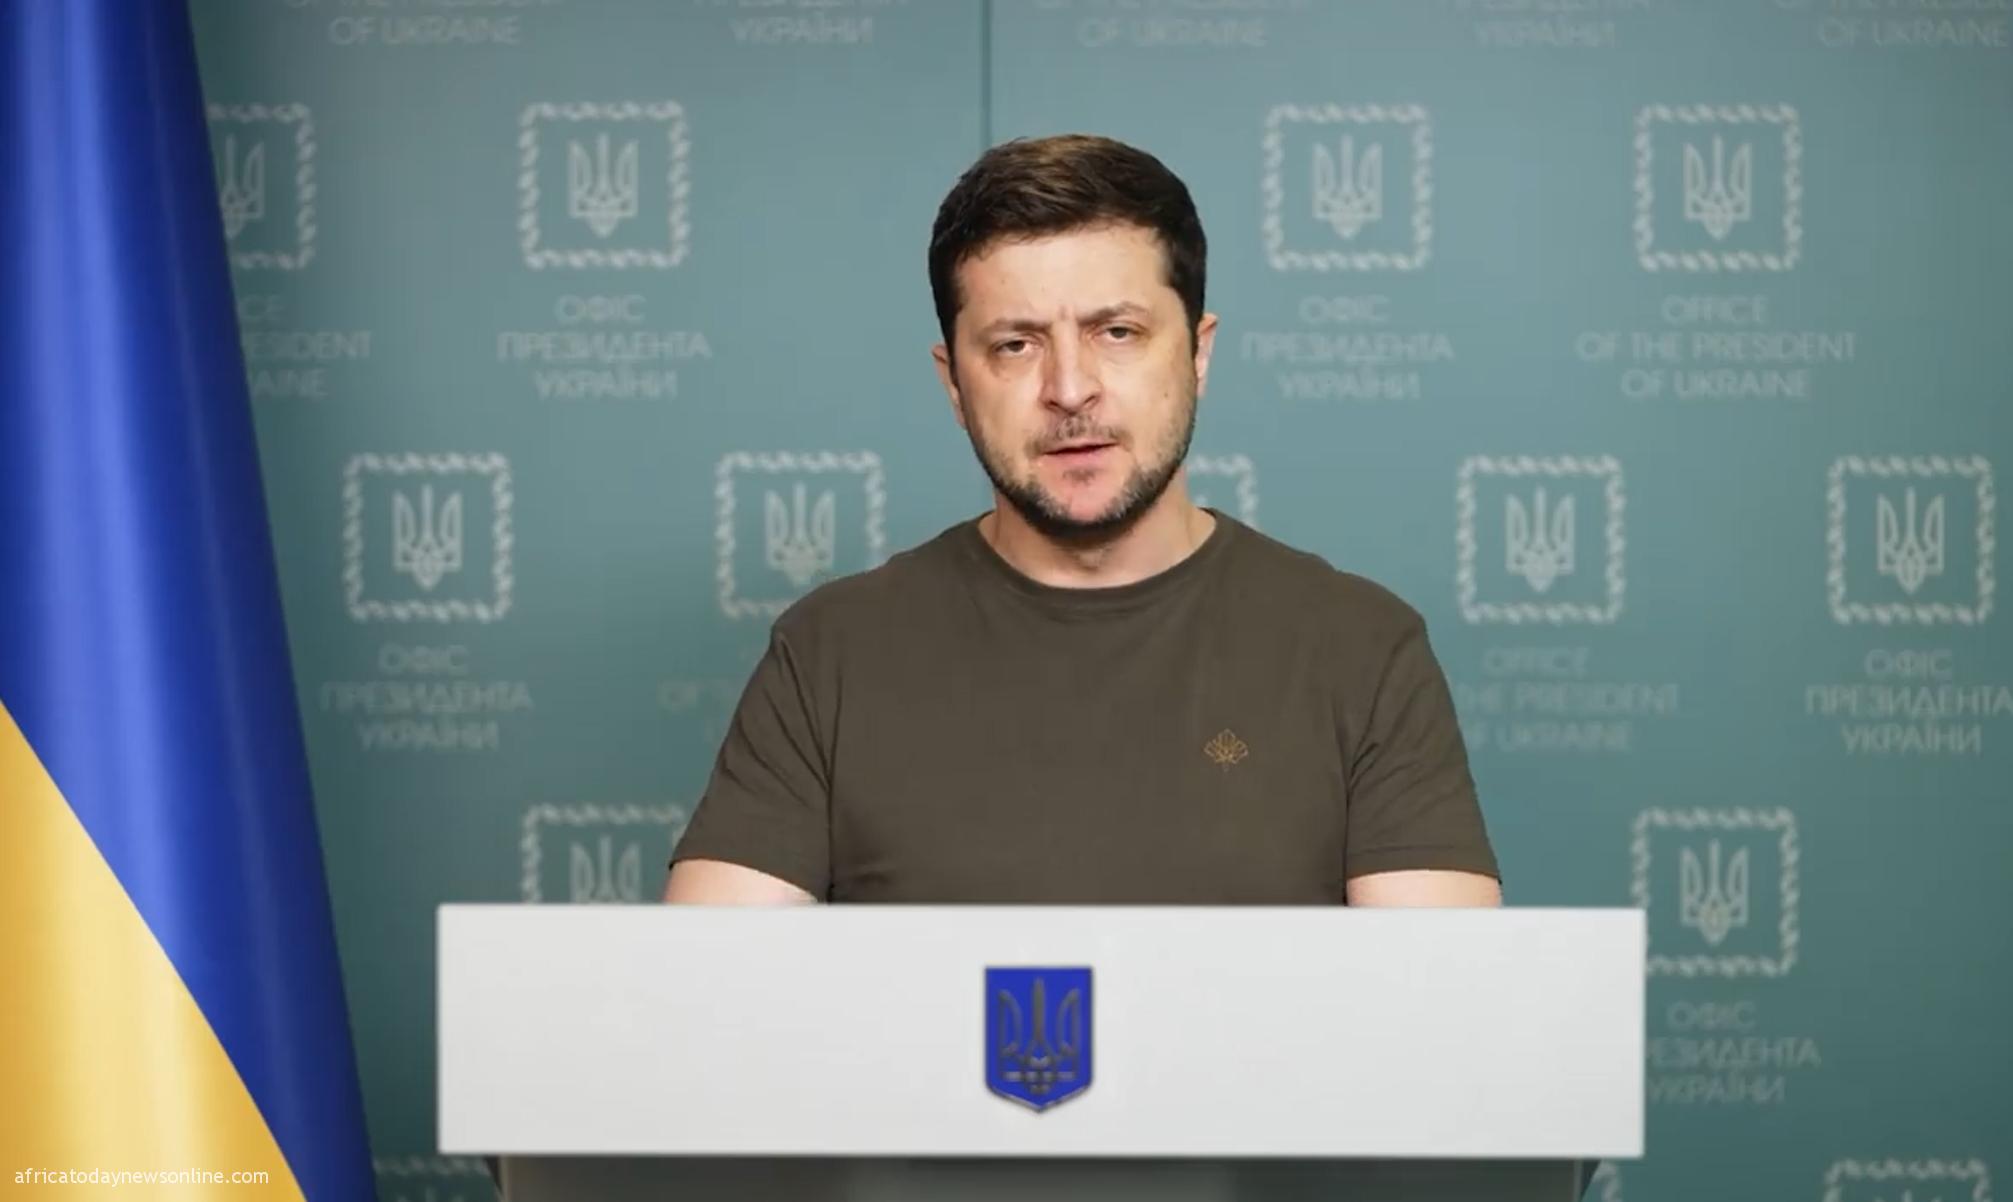 Zelensky Calls For Humanitarian No-Fly-Zone To Stop Russia